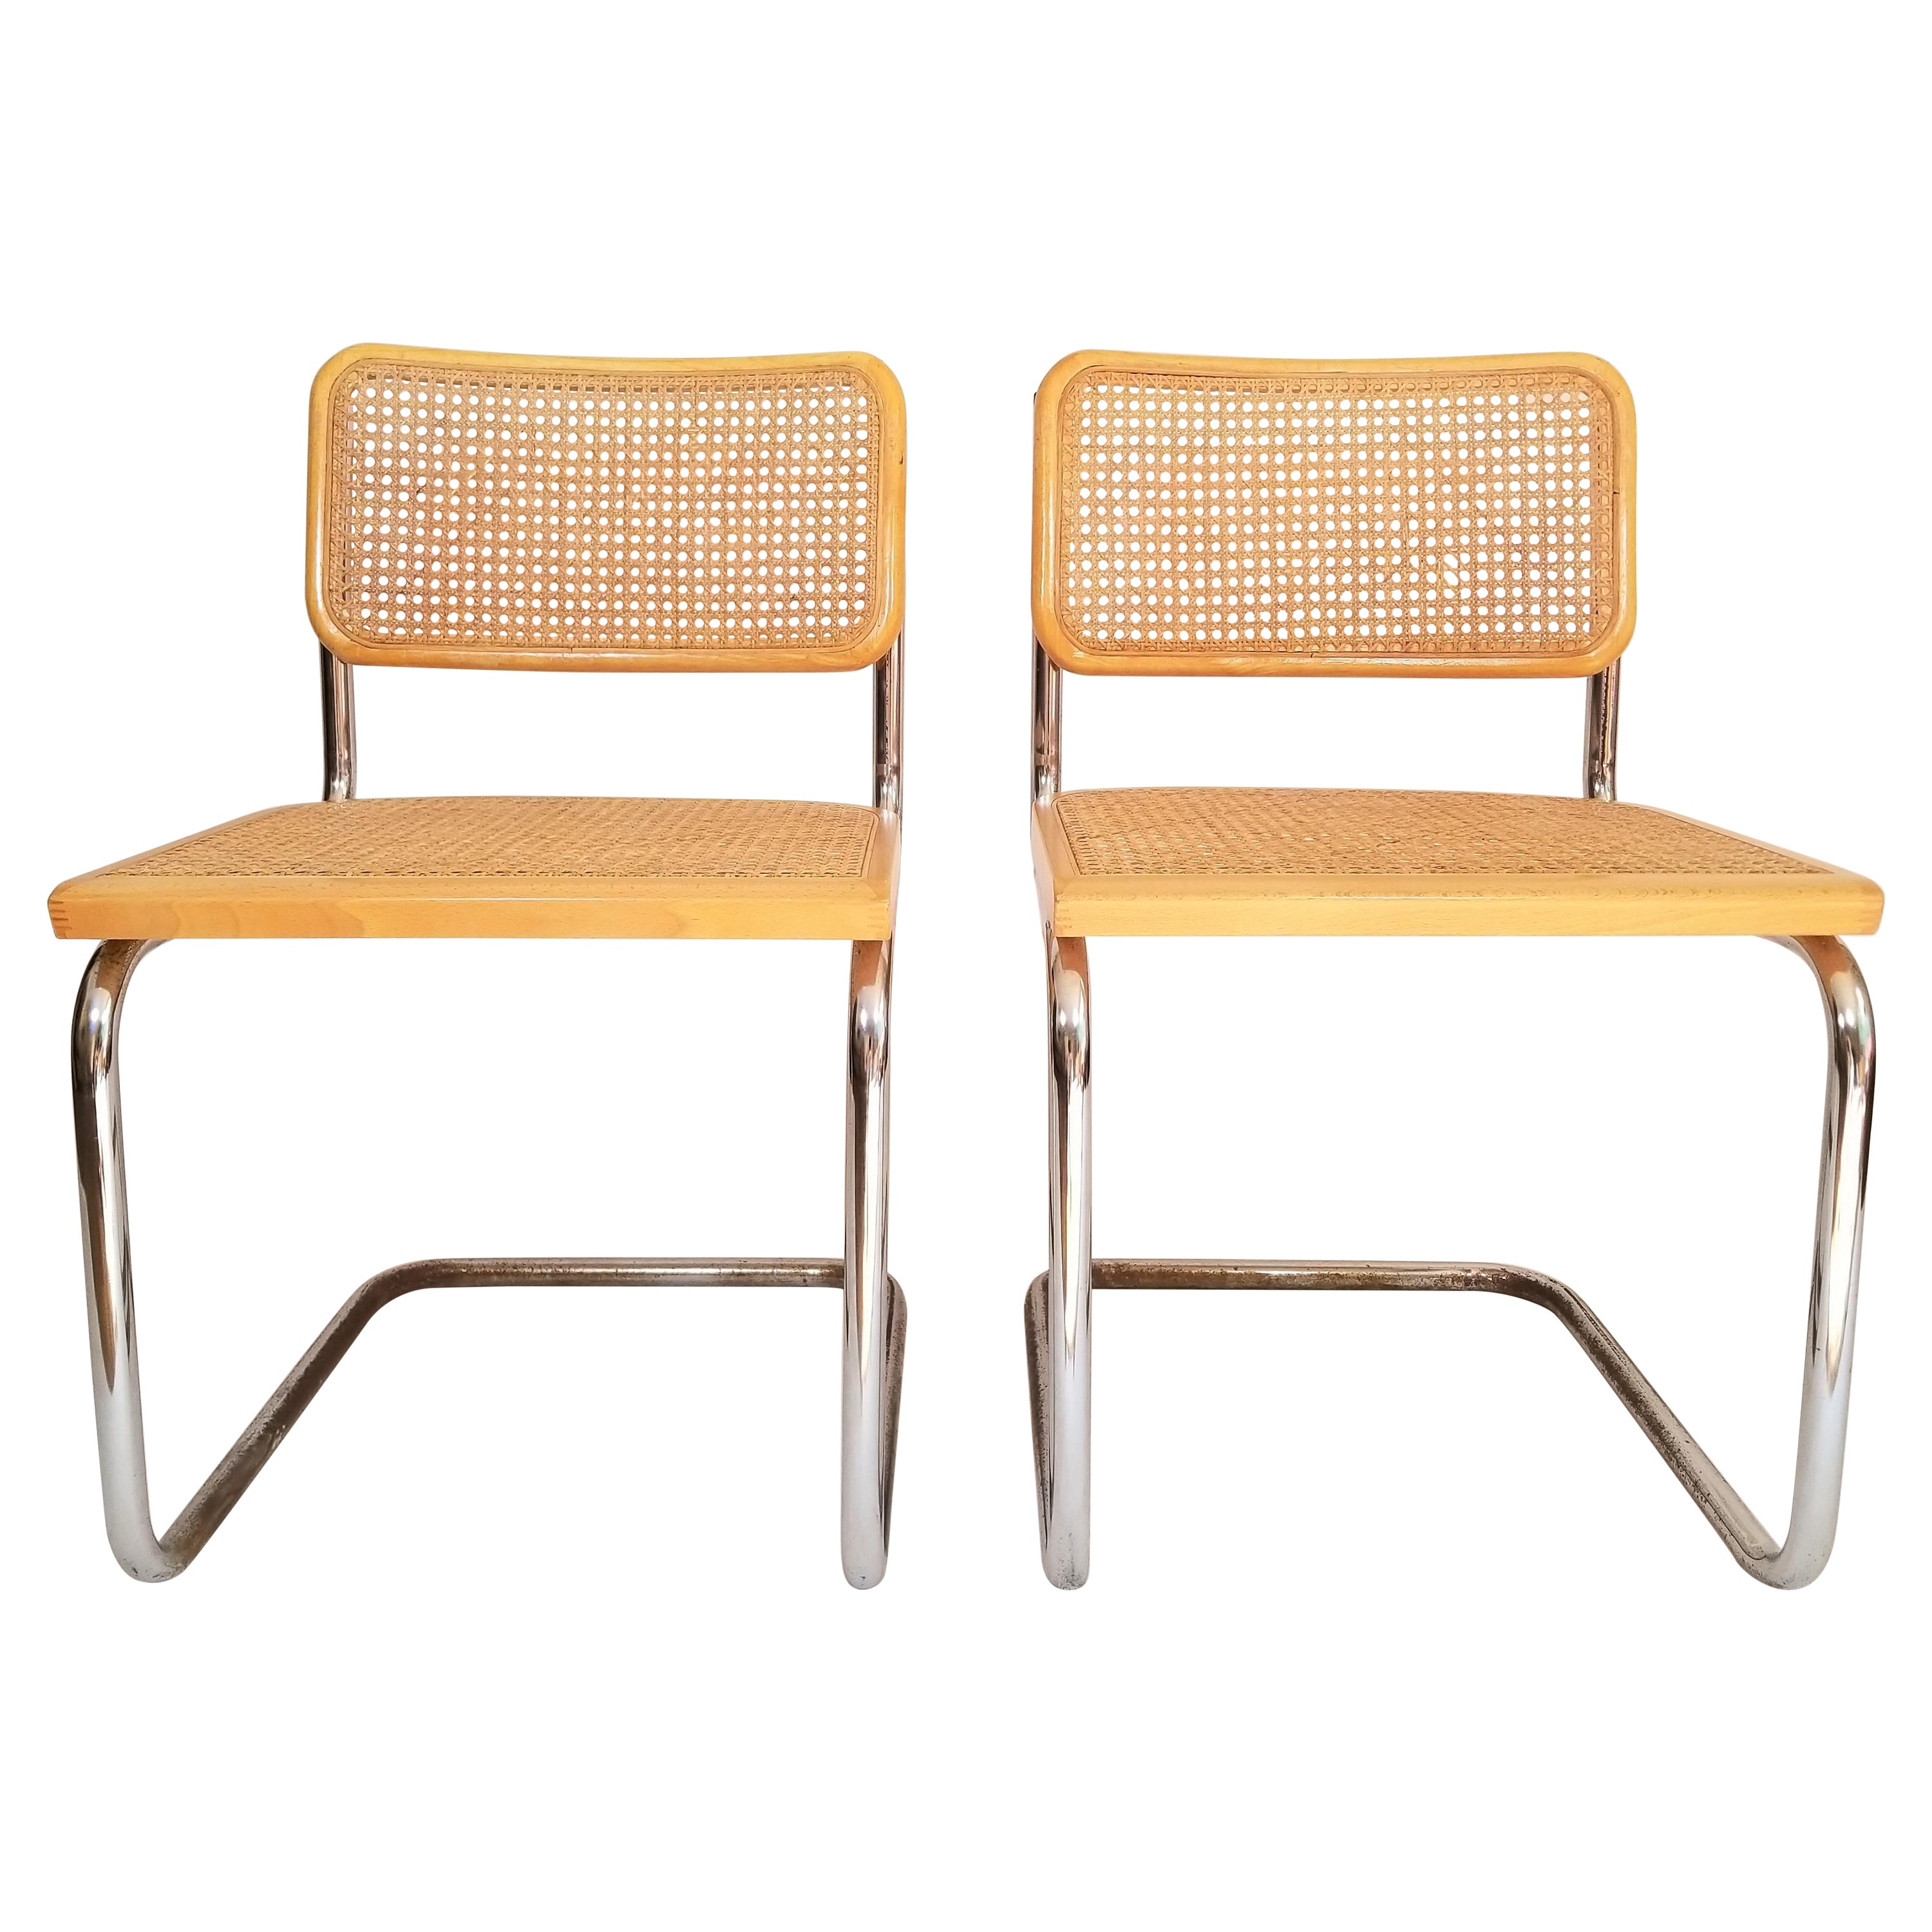 Marcel Breuer Cesca Chairs at 1stDibs | marcel breuer chairs for 